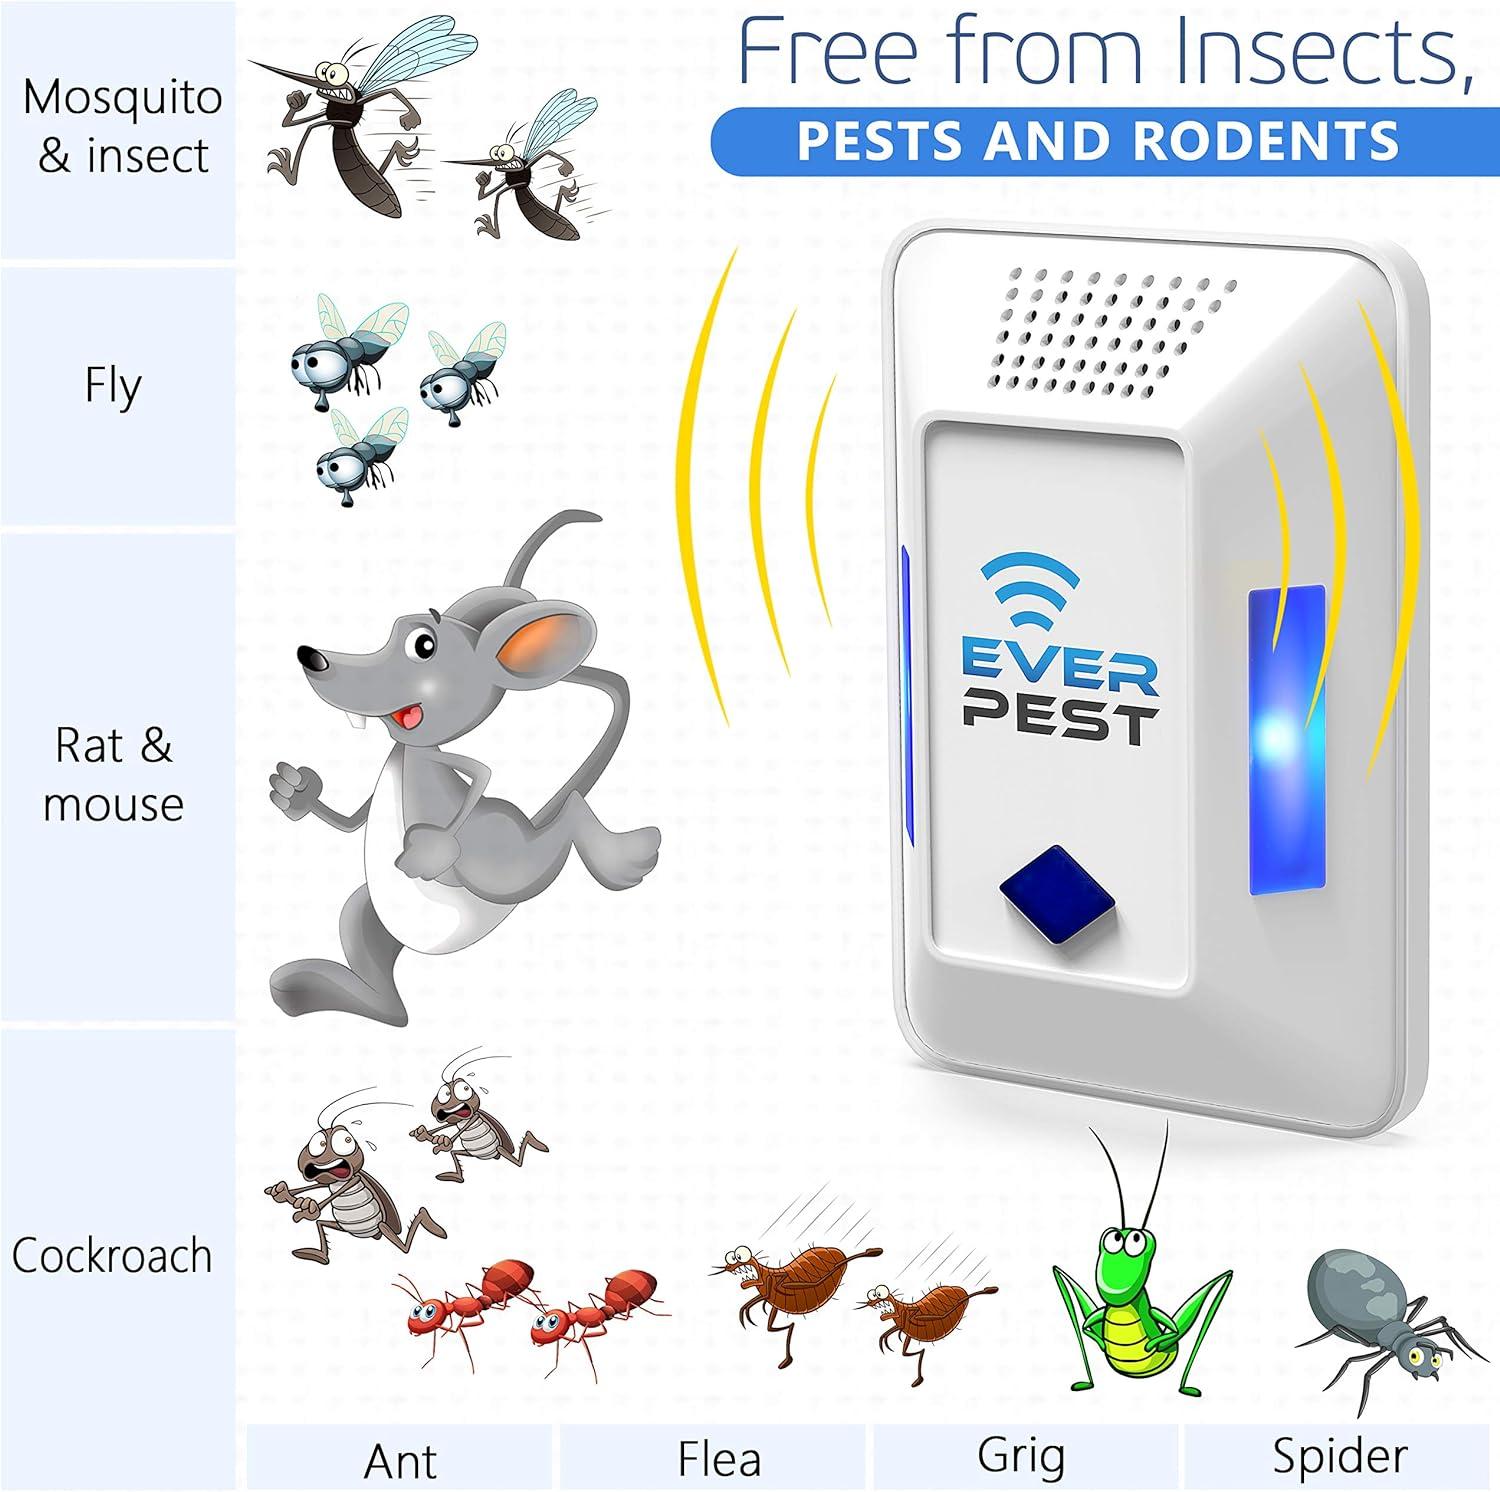 Pest Reject Pro Ultrasonic Electromagnetic Wave Insect And Mouse